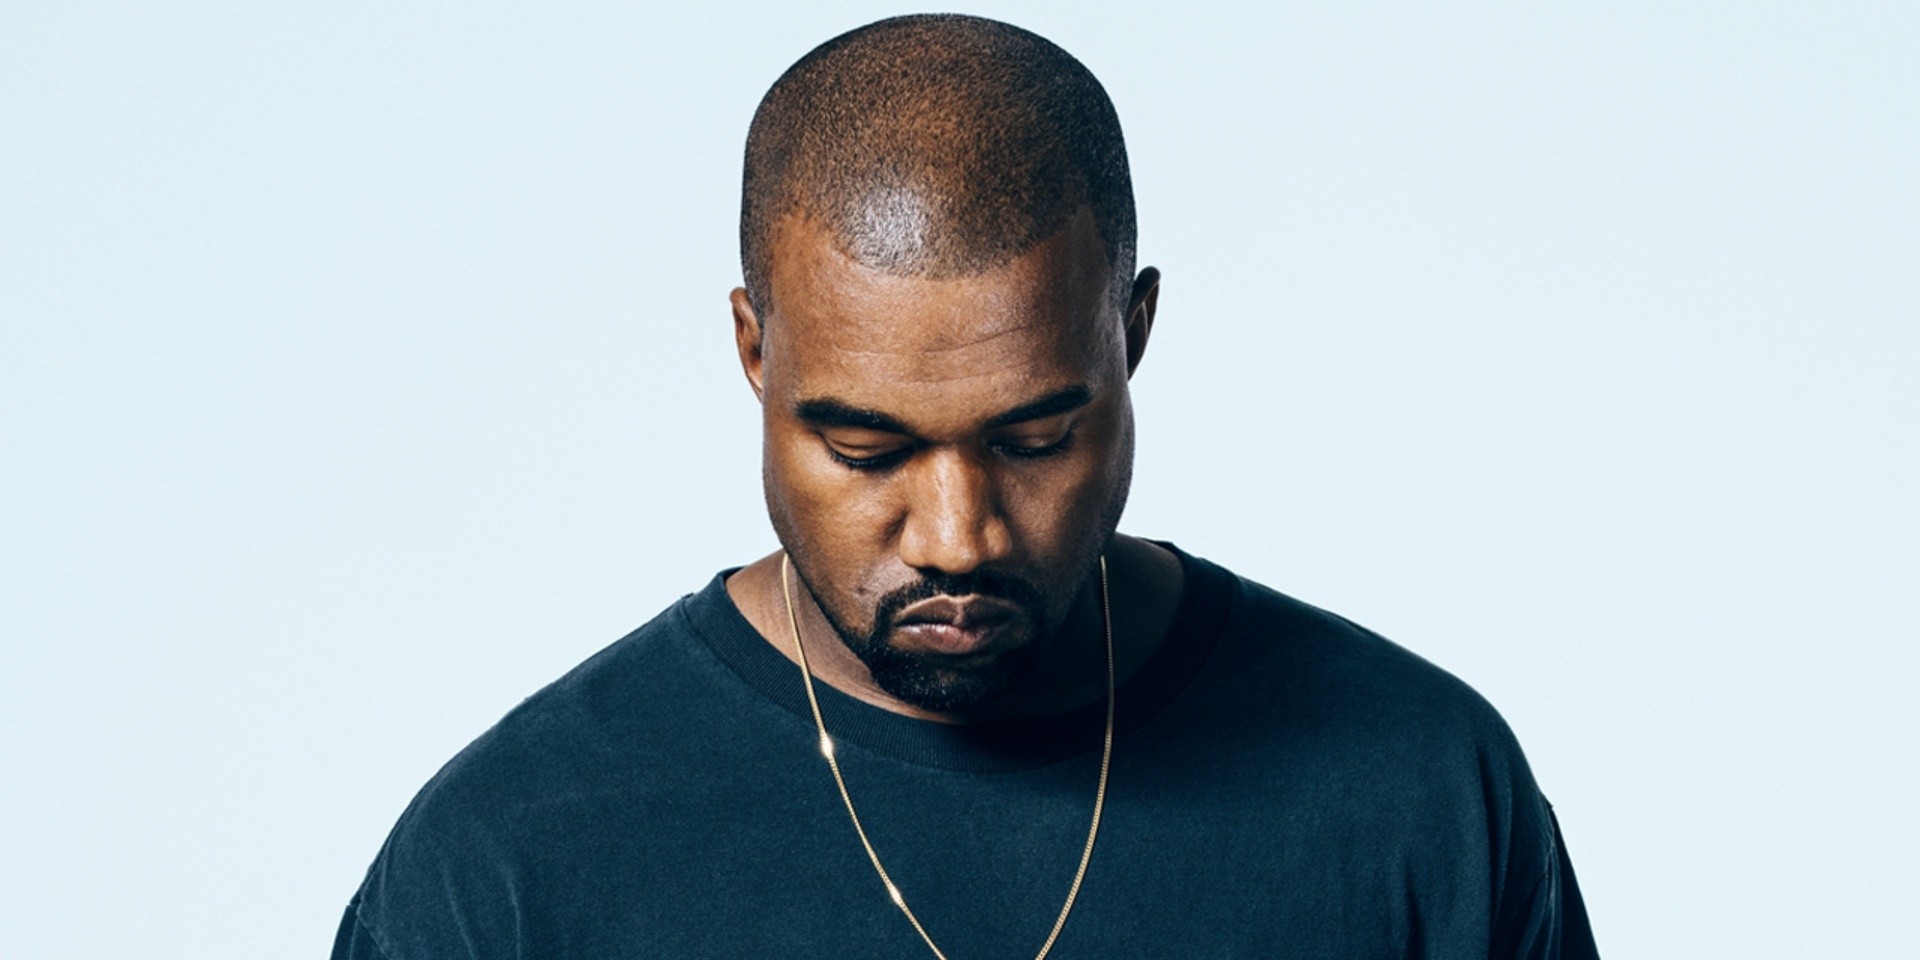 Kanye West's contract states that he can't retire from music